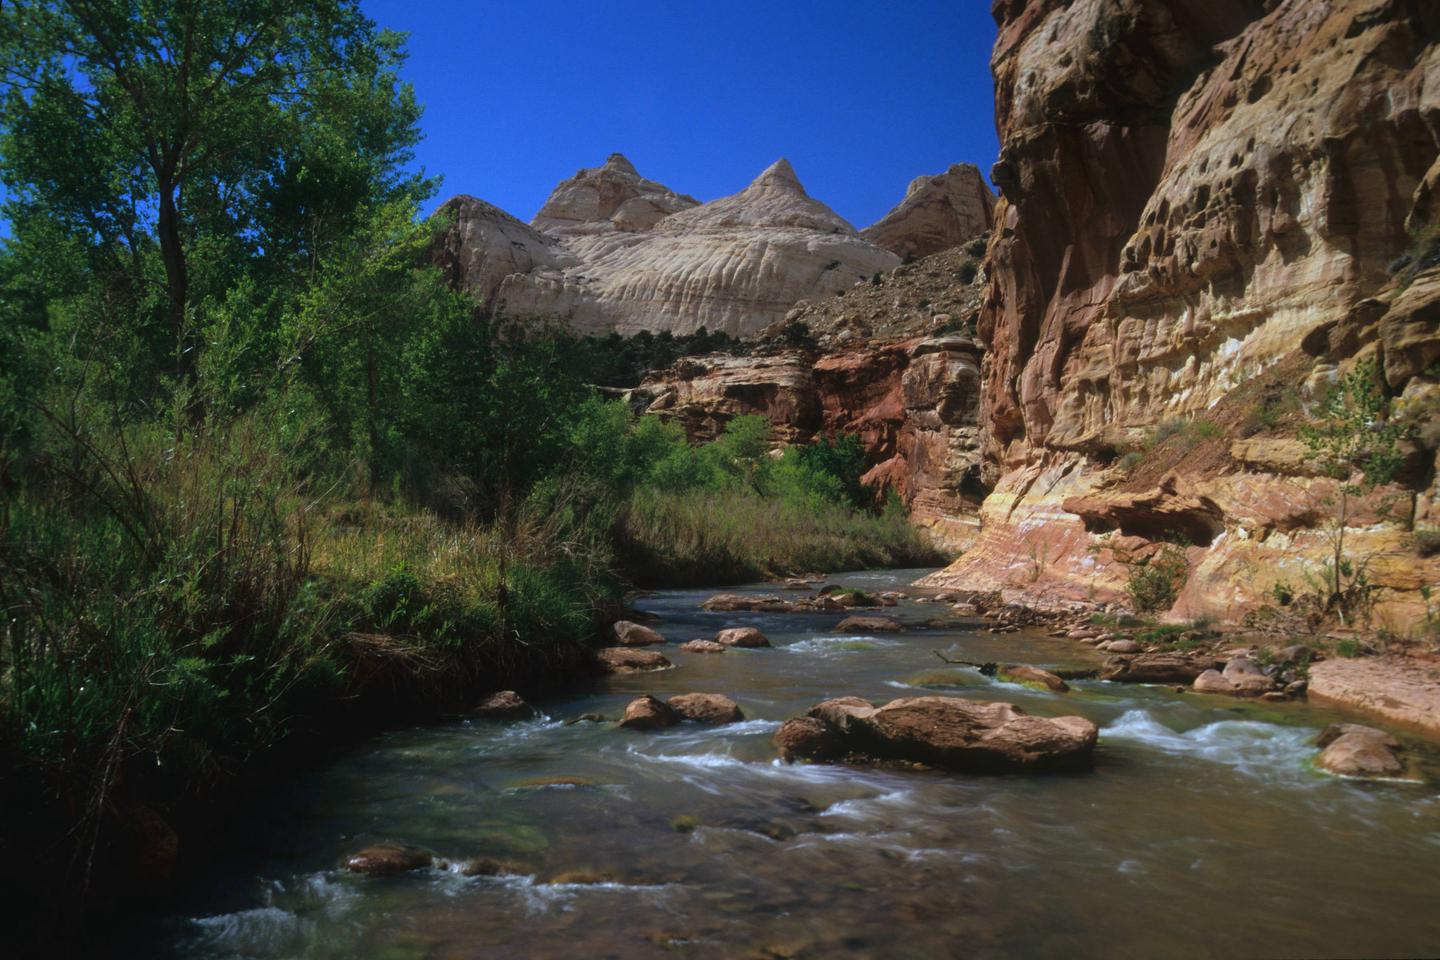 A stream with red-brown rocks in it. On the left side is green foliage. On the right side is a red-brown cliff. In the background is a white rock formation rising into a vibrant blue sky.Navajo Dome overlooking the Freemont River